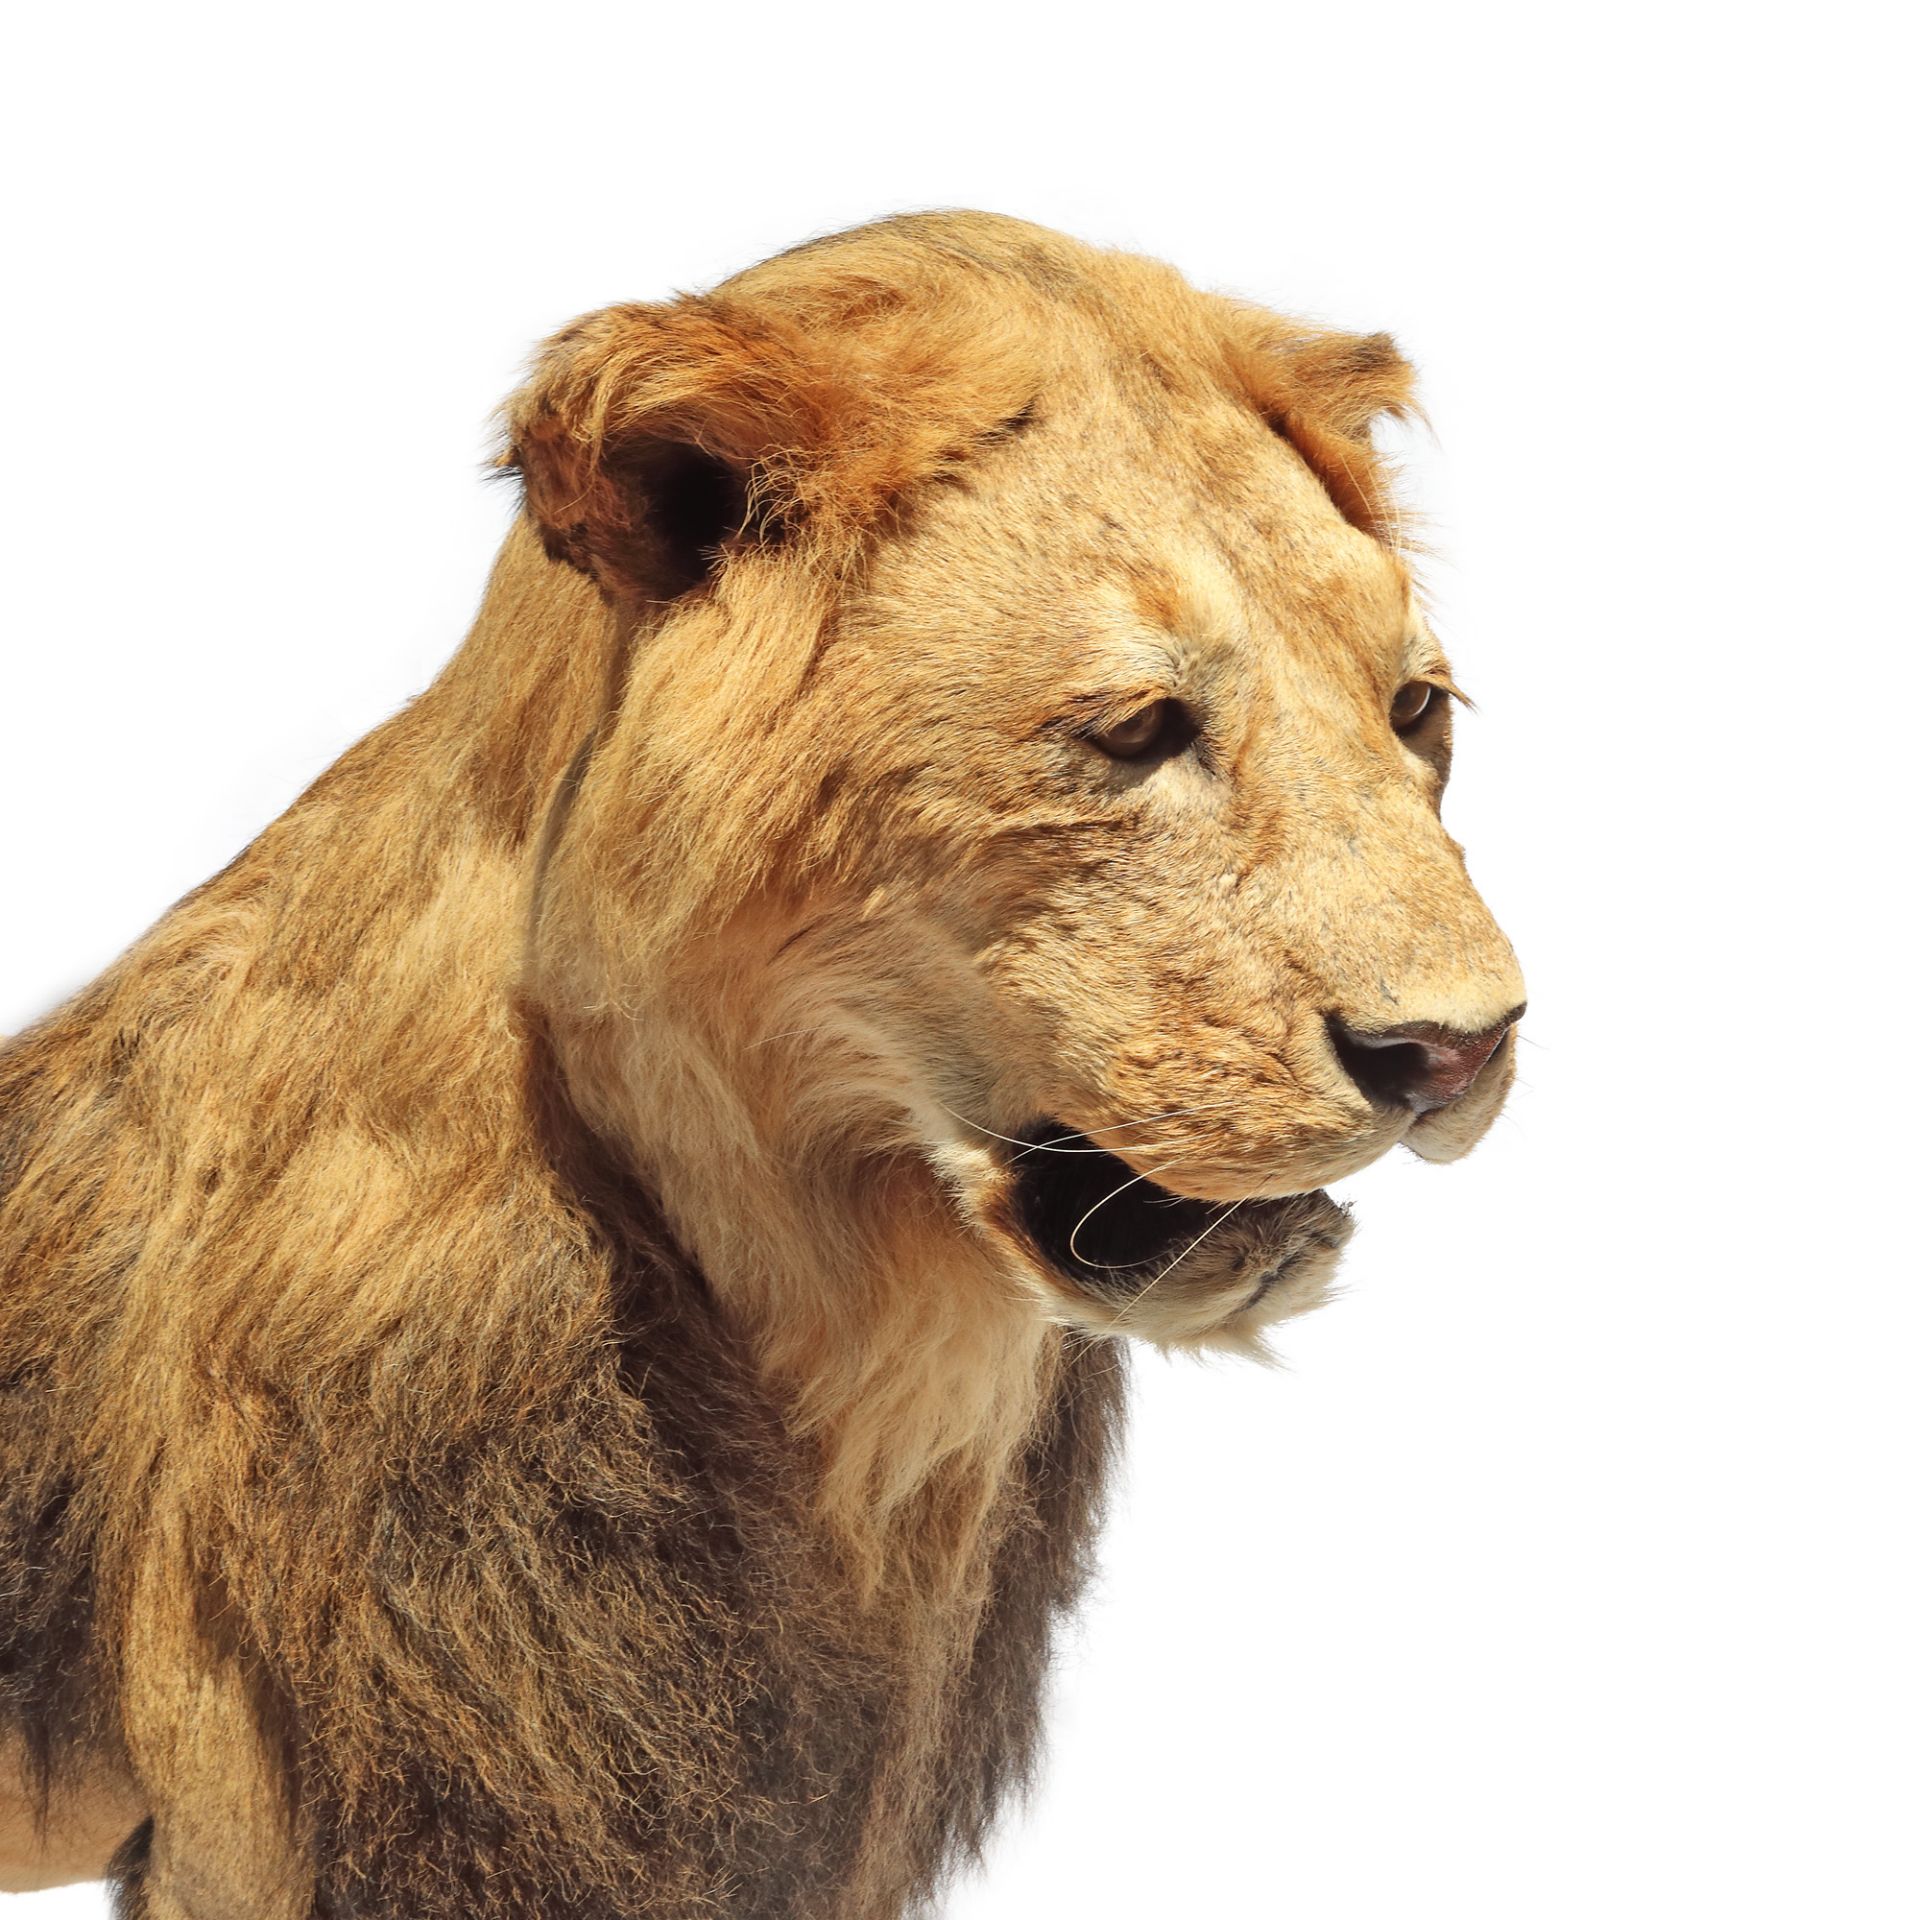 Male lion trophy, complete, with pedestal - Image 4 of 6